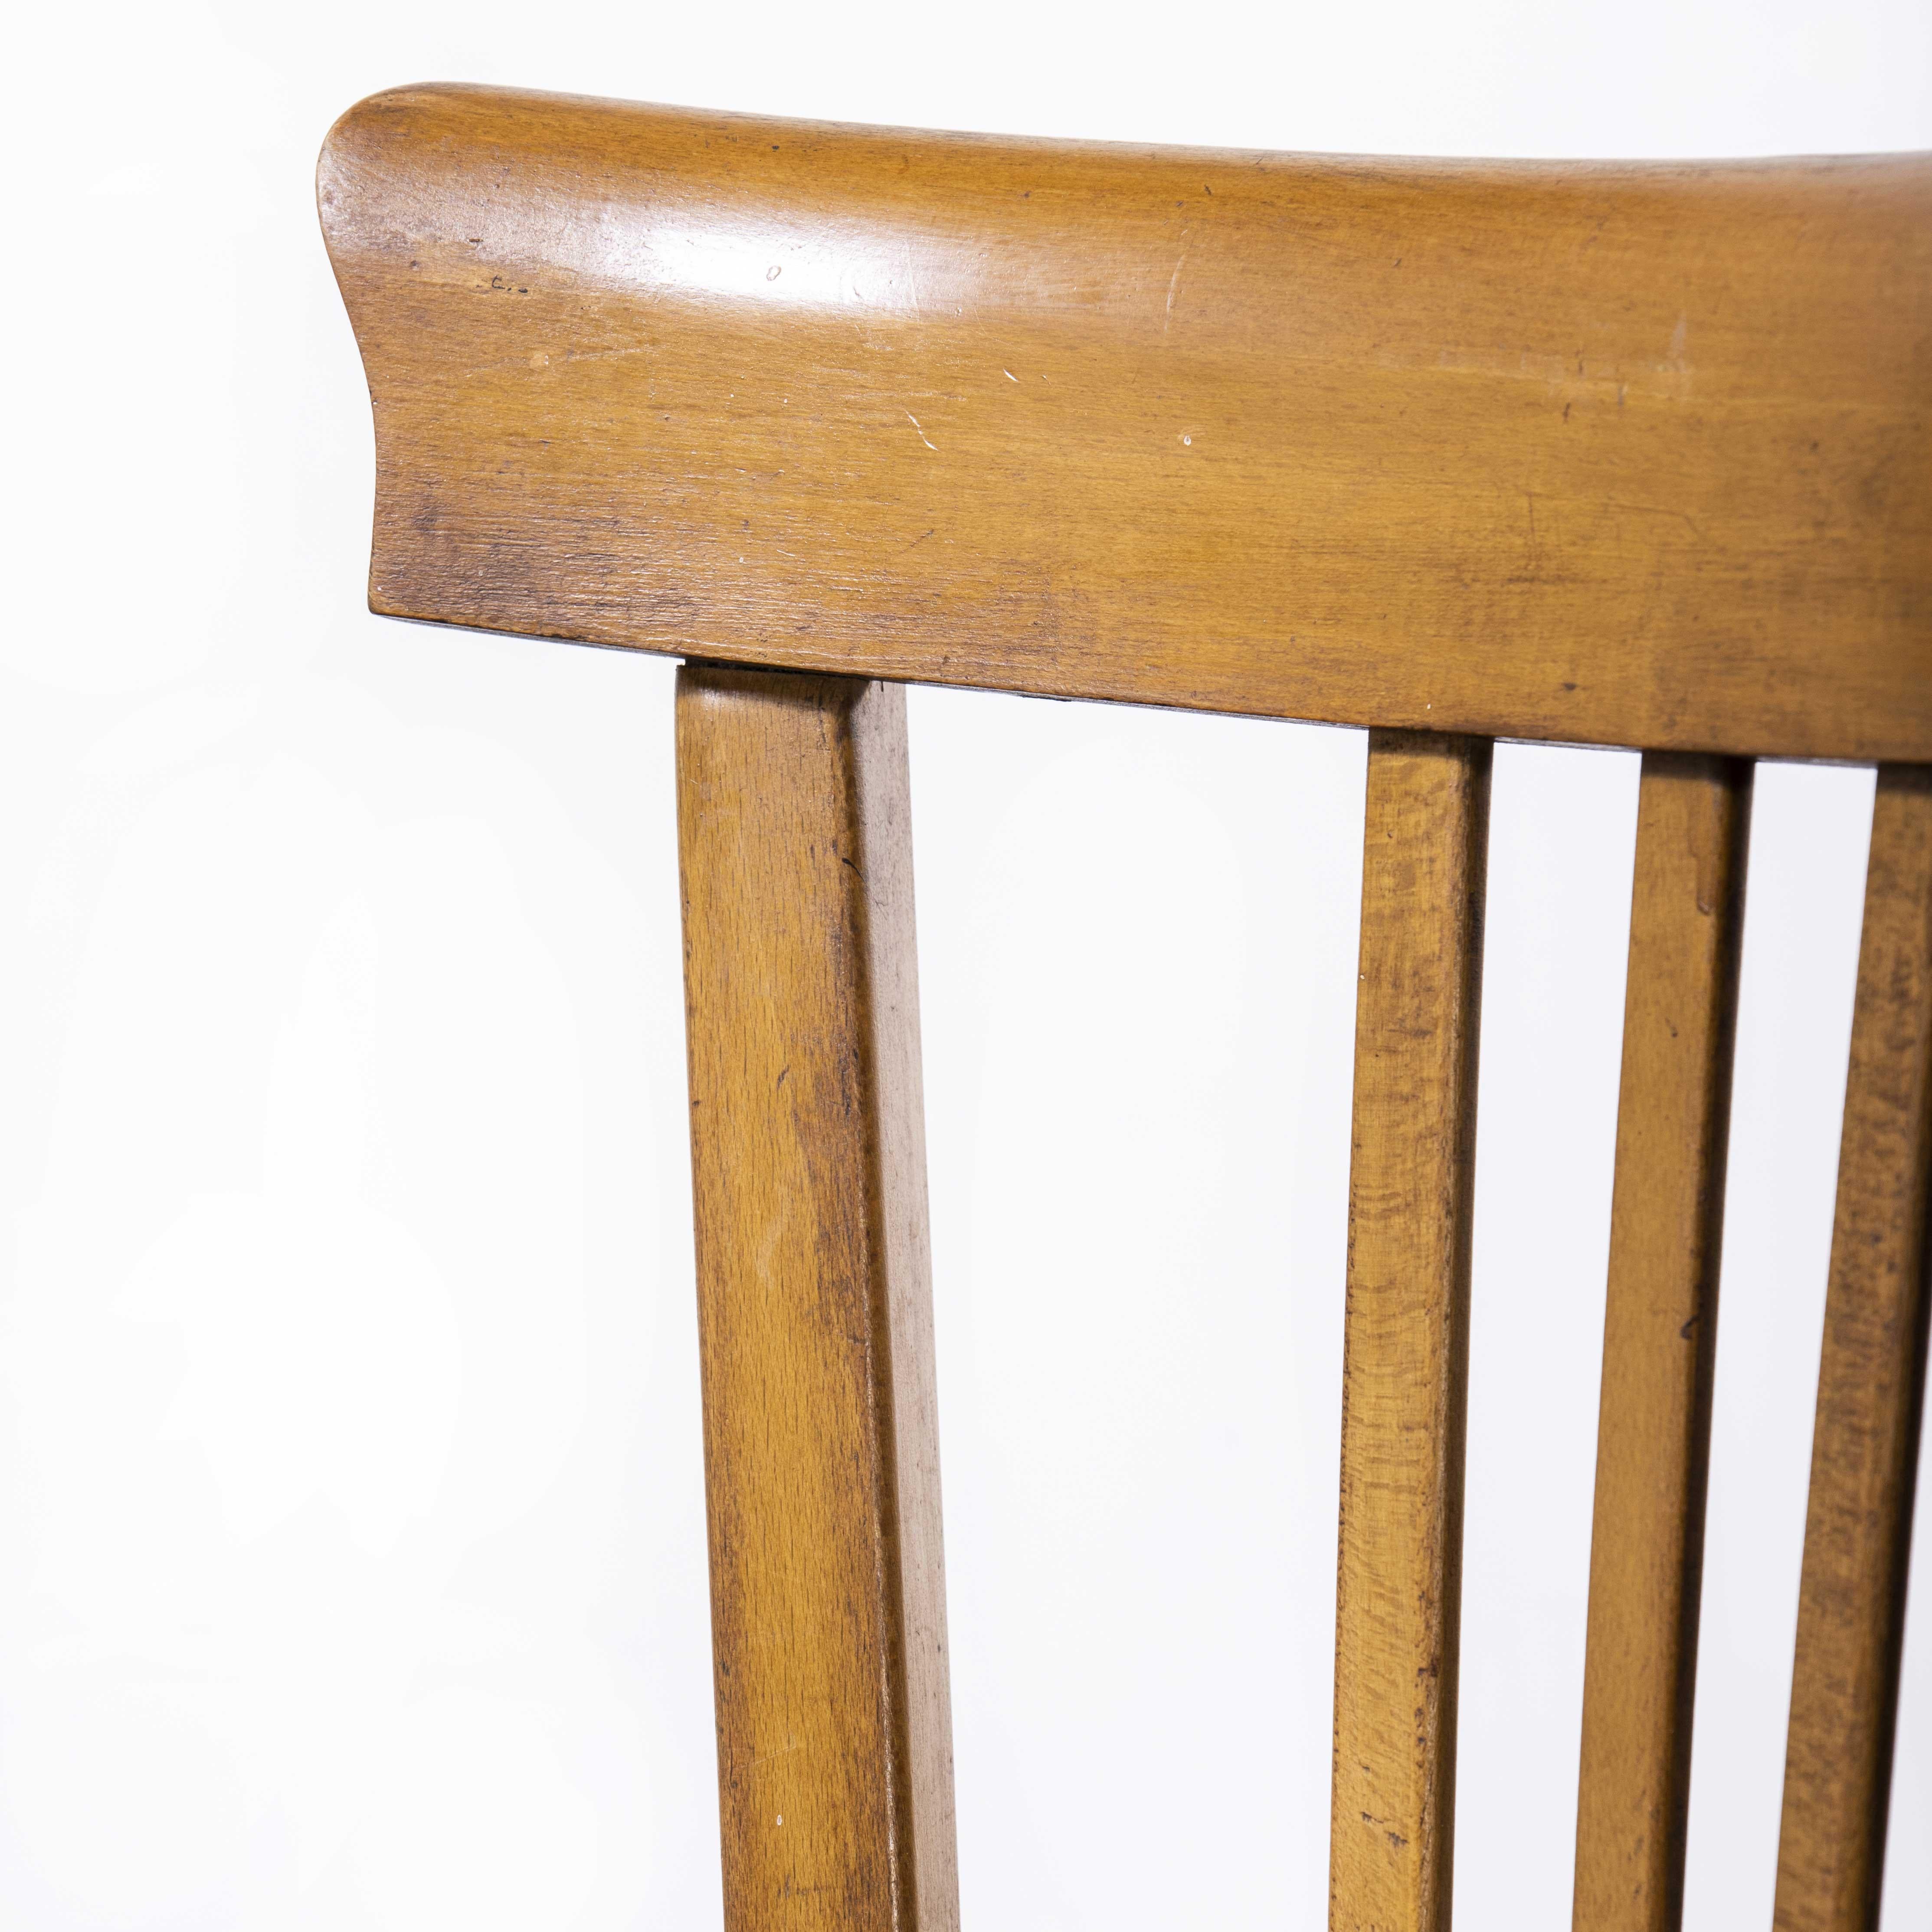 1950’s luterma saddle back bentwood dining chair – set of six

1950’s luterma saddle back bentwood dining chair – set of six. The process of steam bending beech to create elegant chairs was discovered and developed by Thonet, but when its patents